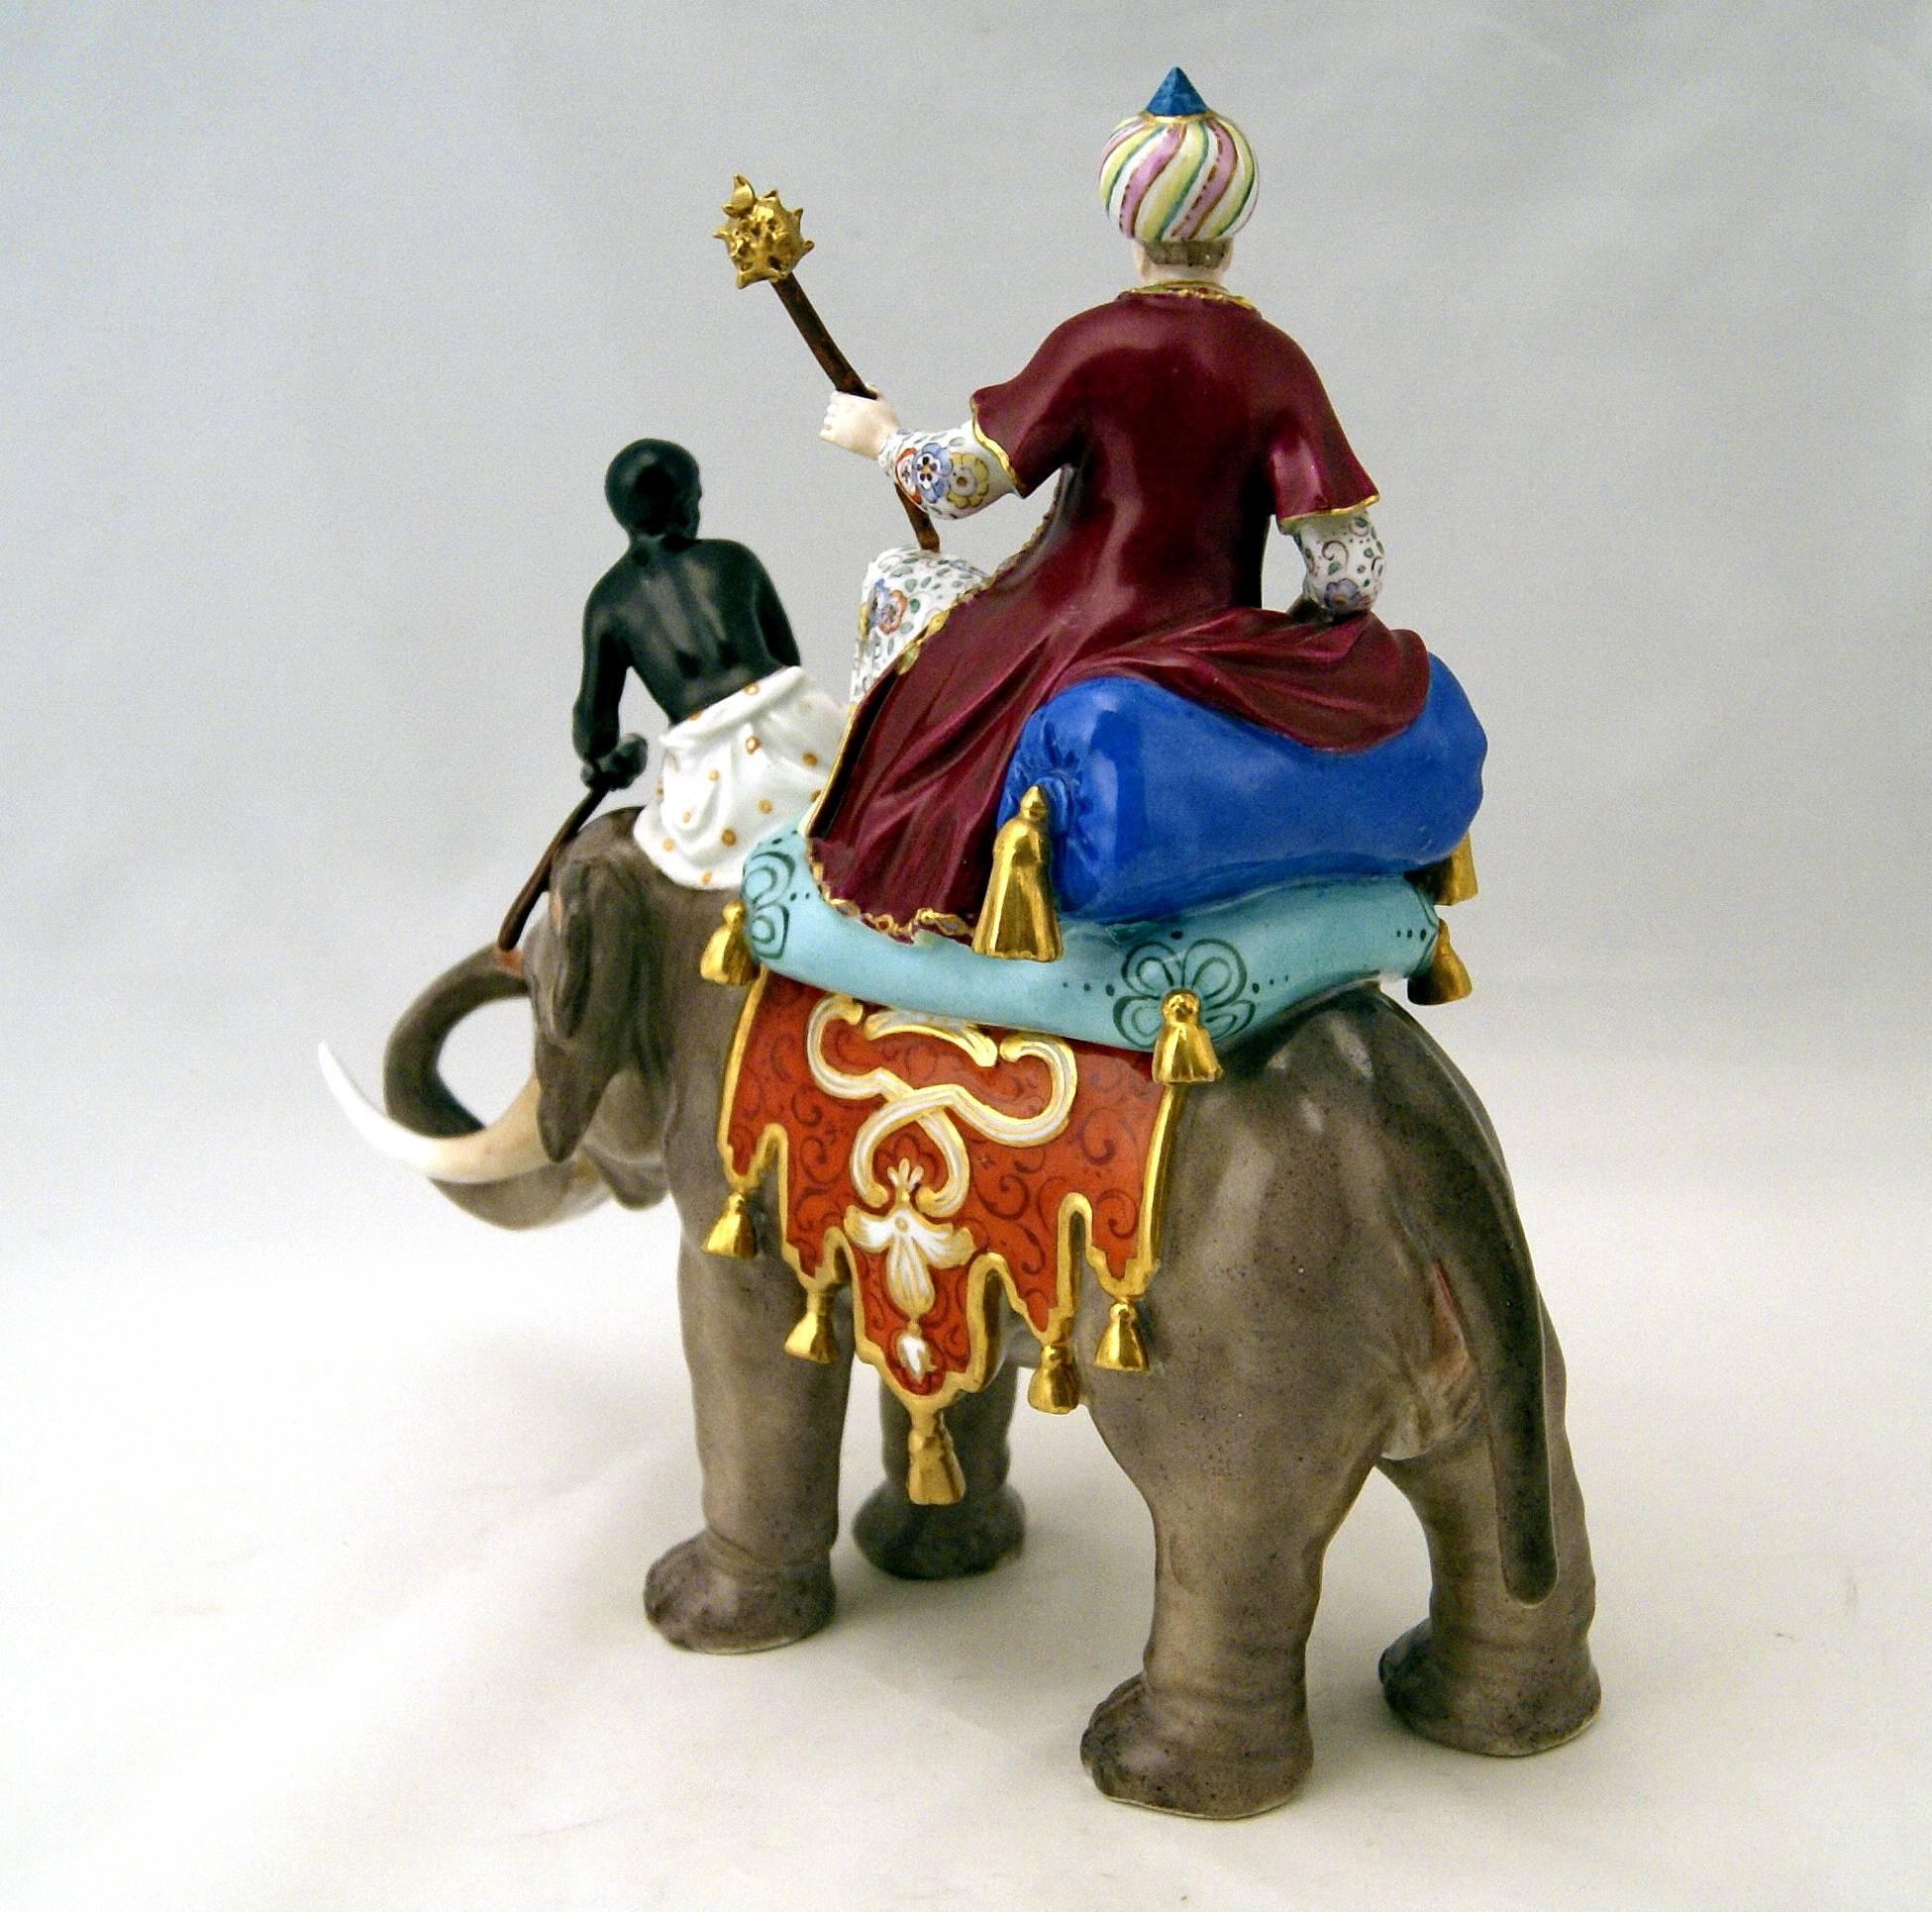 Meissen gorgeous figurine group of finest quality:
There is persian nobleman visible, riding an elephant (accompanied by black servant) - all of them of most interesting appearance.
Figurine type: Series of Foreign People.

Manufactory: